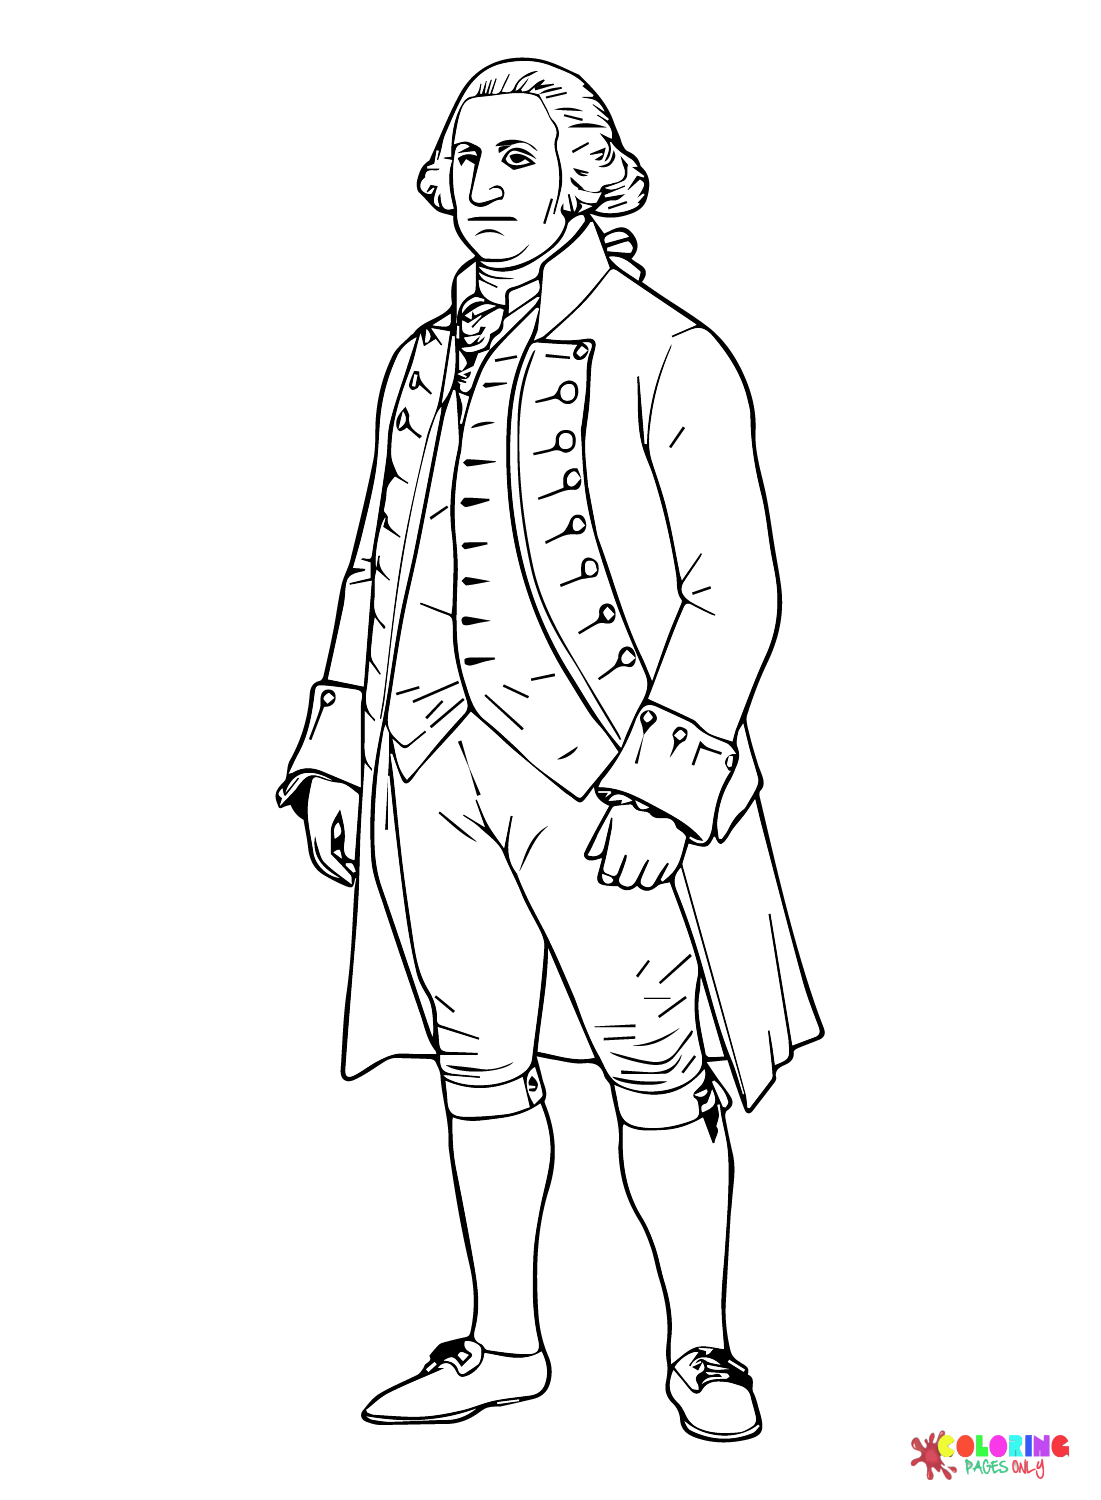 George Washington Coloring Pages Printable for Free Download